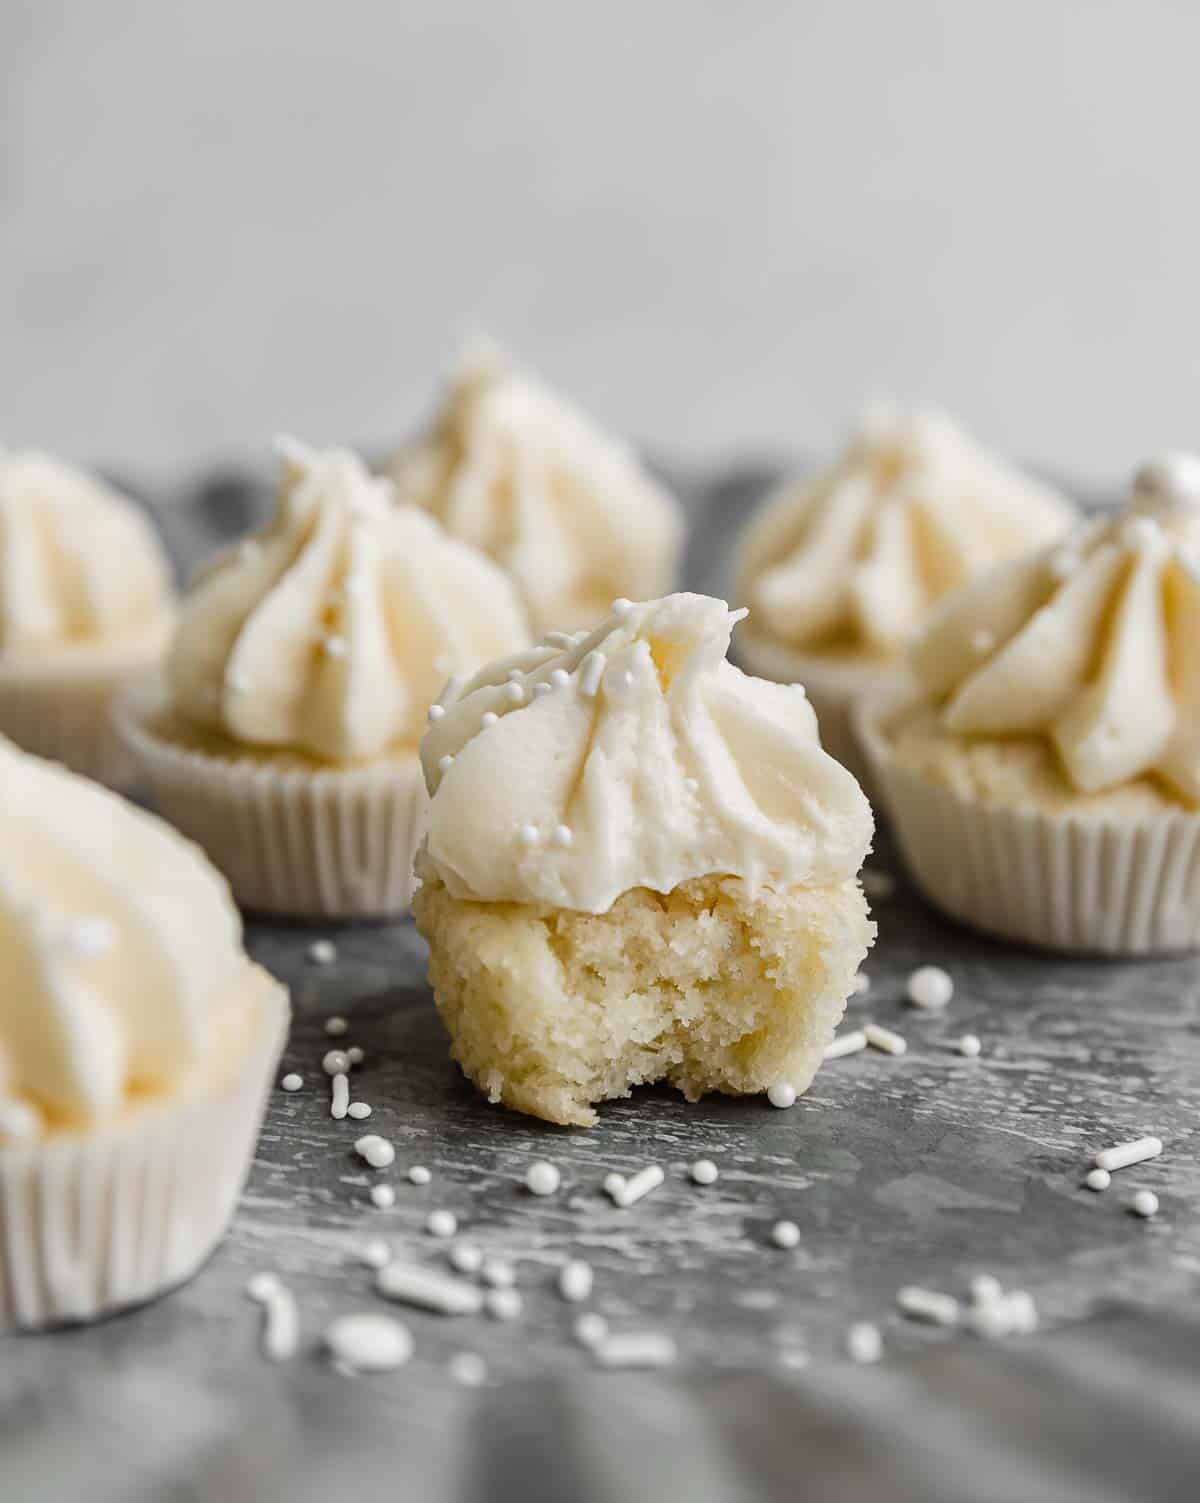 A vanilla mini cupcake topped with vanilla frosting with a bite taken out of the mini cupcake.